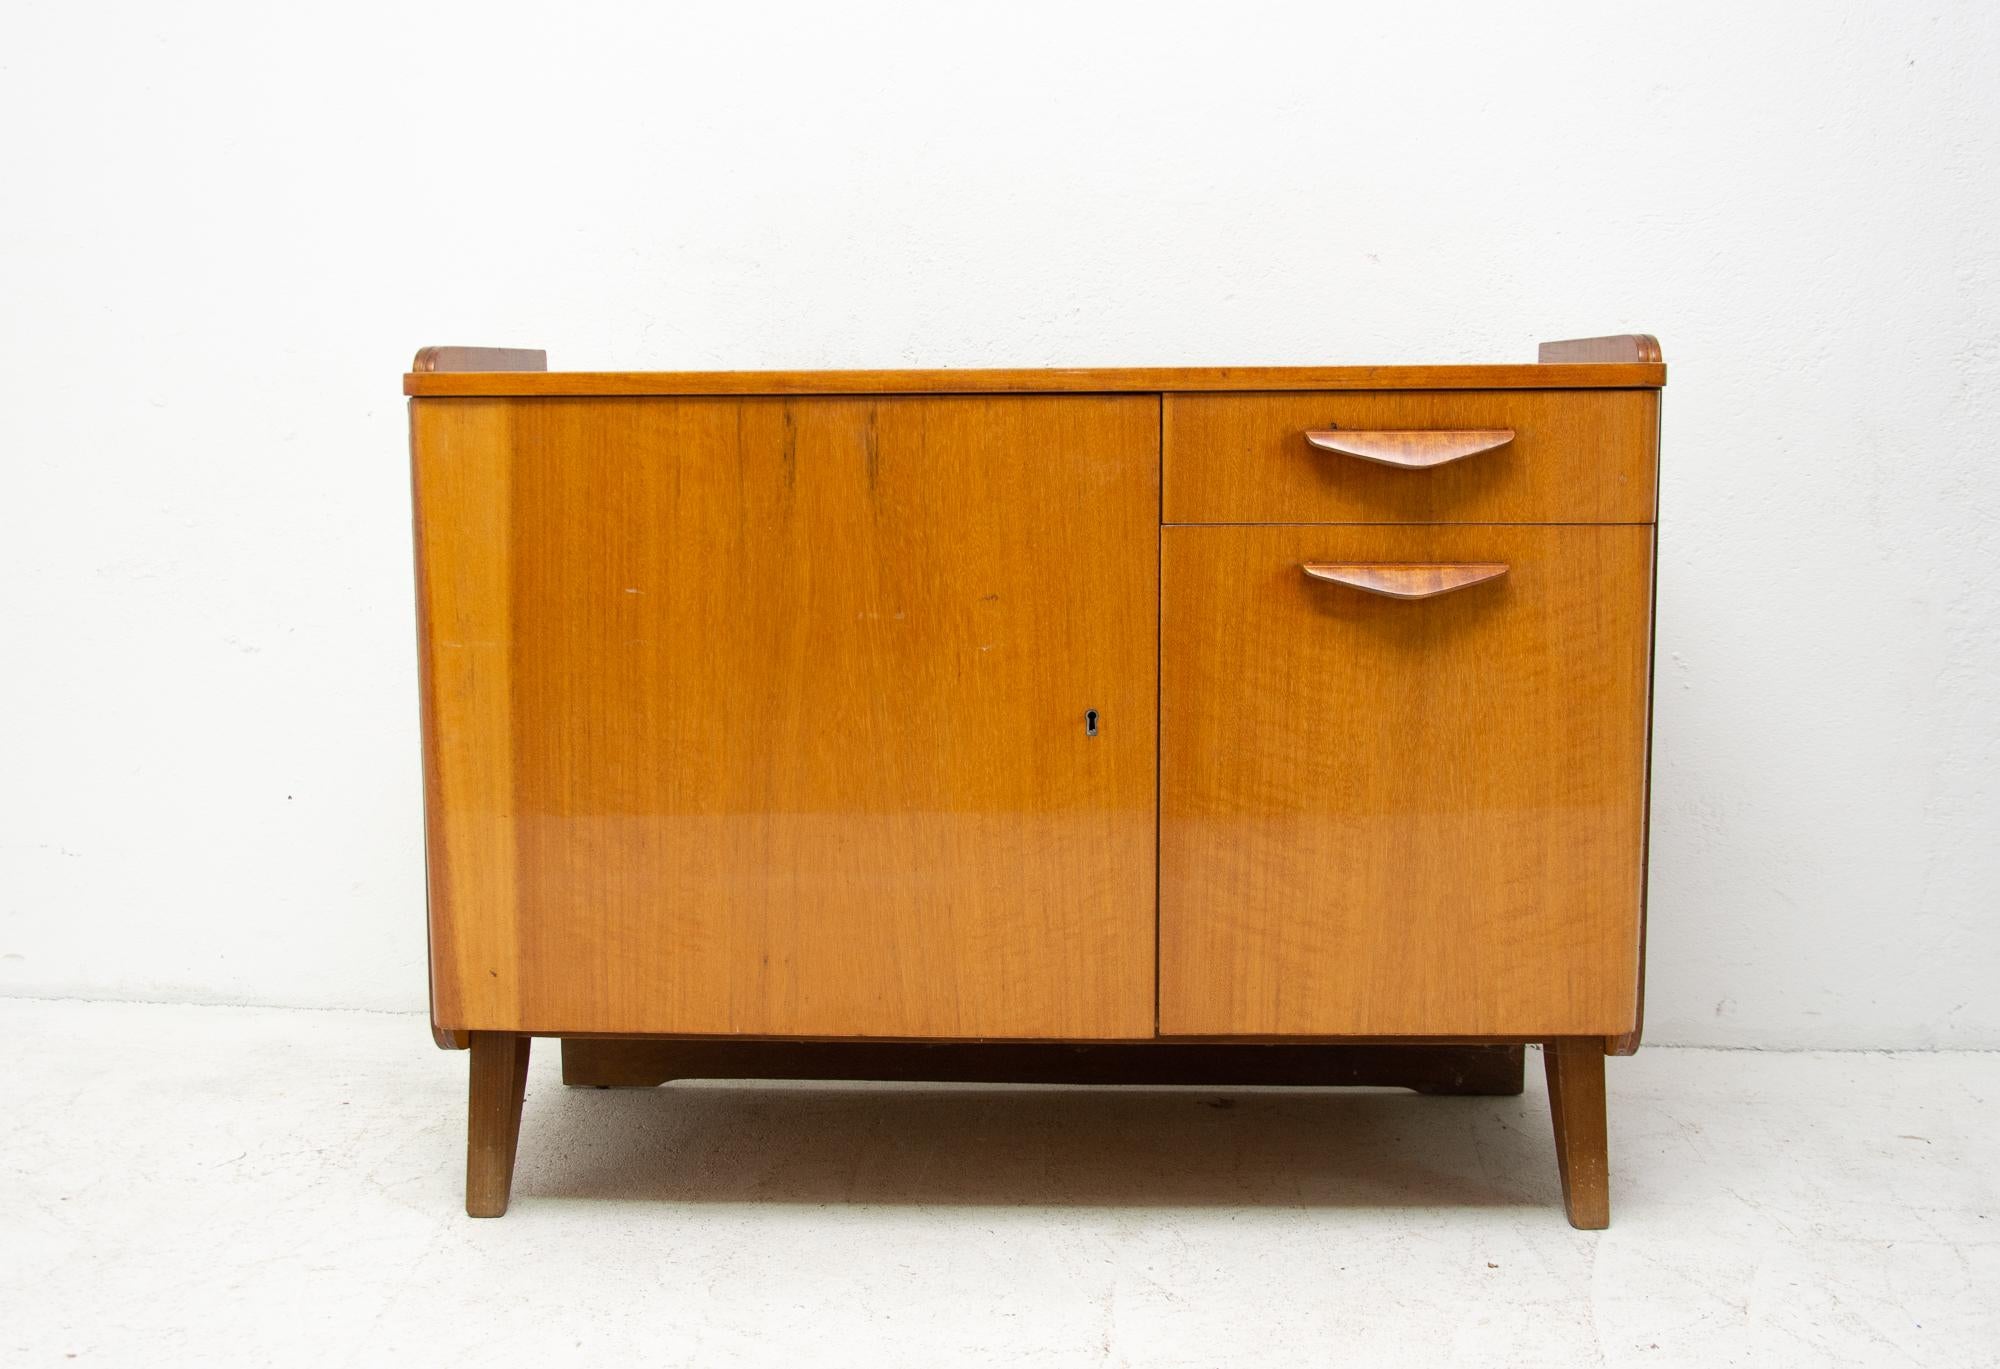 Midcentury vintage small cabinet or TV table from the 1960s. It was designed by František Jirák and was manufactured by Tatra Nábytok Company in the former Czechoslovakia. In very good condition. Beautiful walnut veneer, plywood.